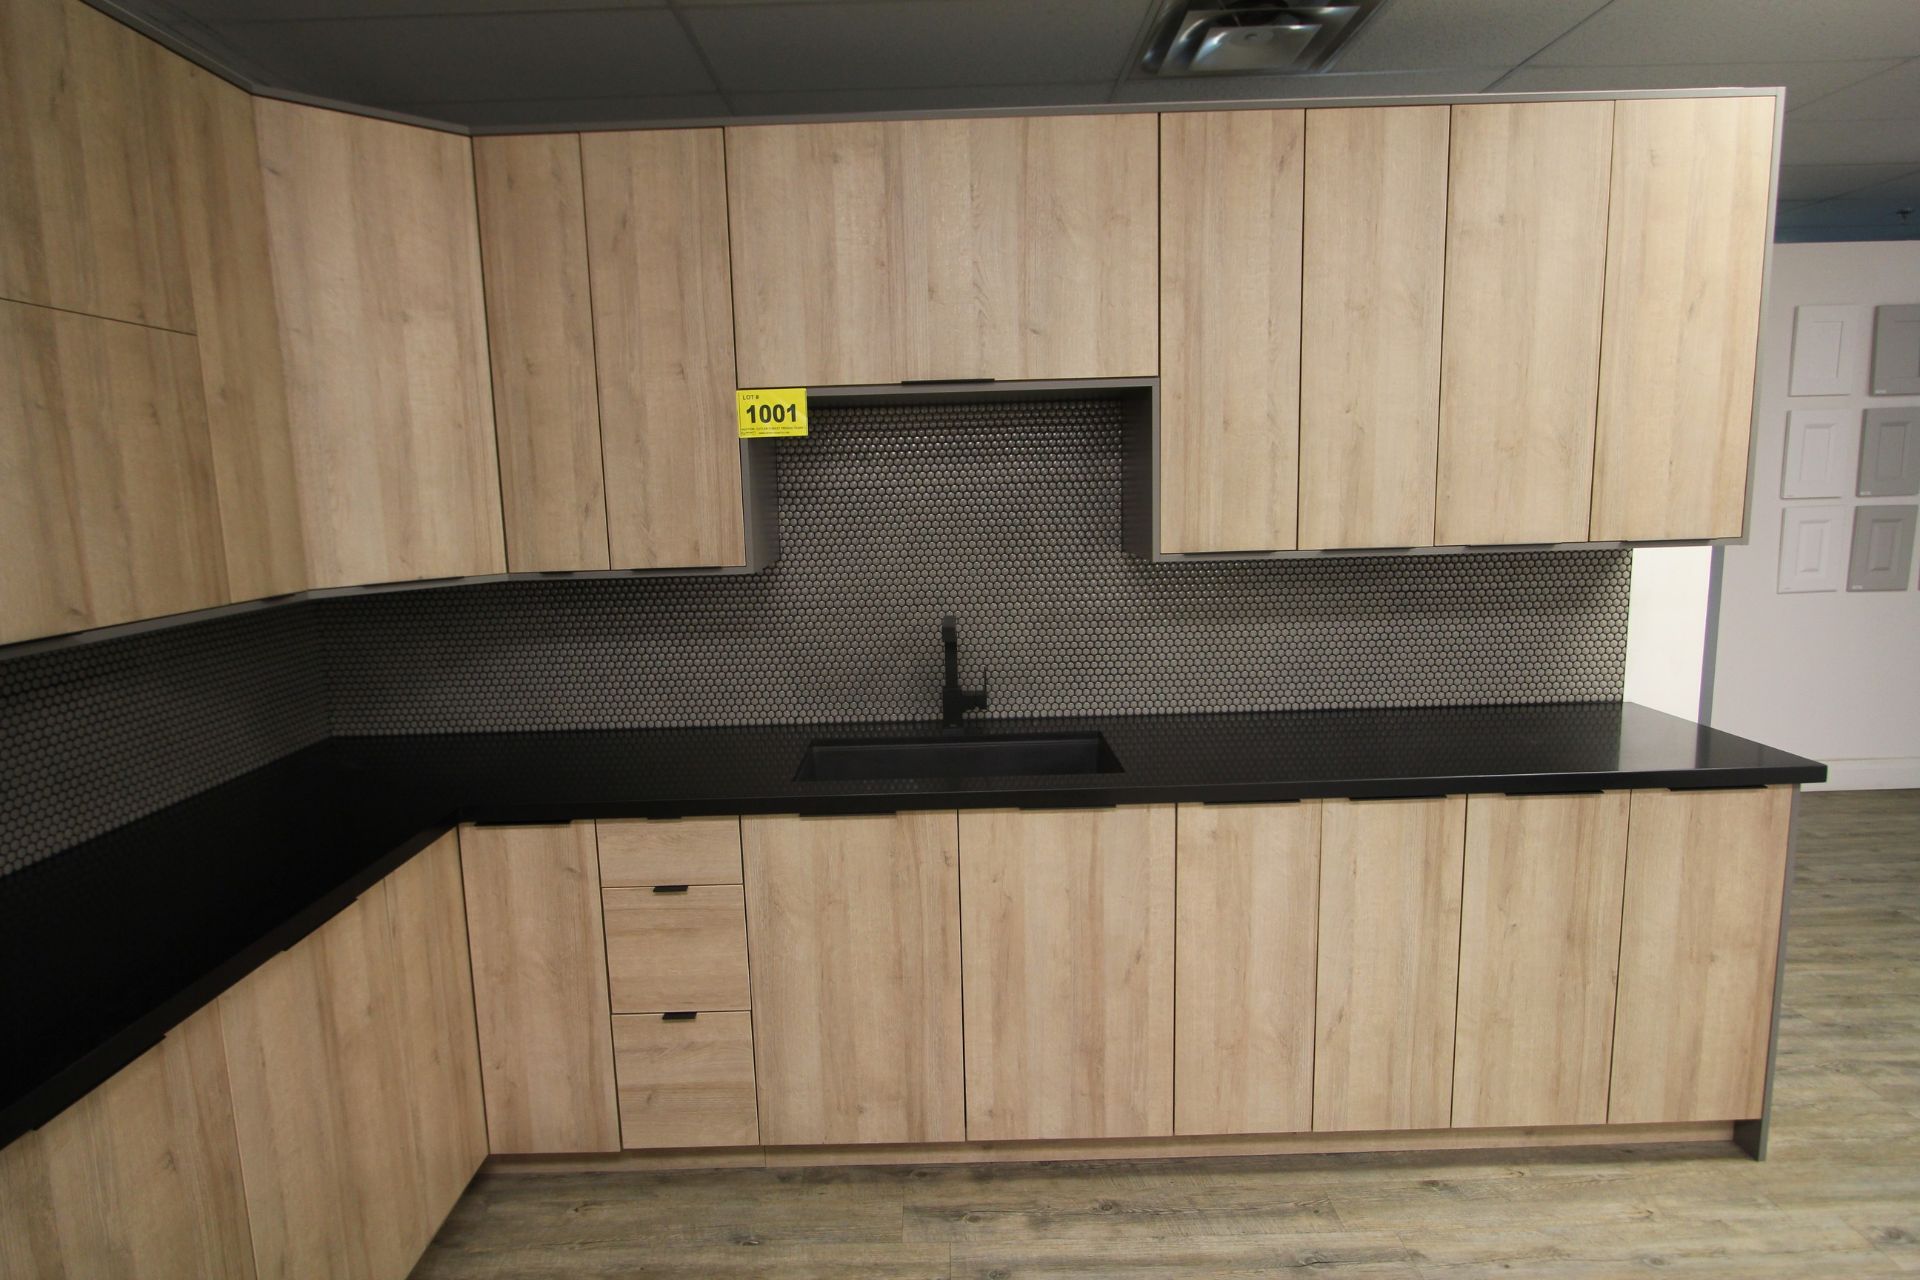 SHOWROOM DISPLAY KITCHEN, 137"L X 118"W X 89"L SEATING COUNTER W/ CABINETRY, COUNTERTOP, - Image 2 of 7